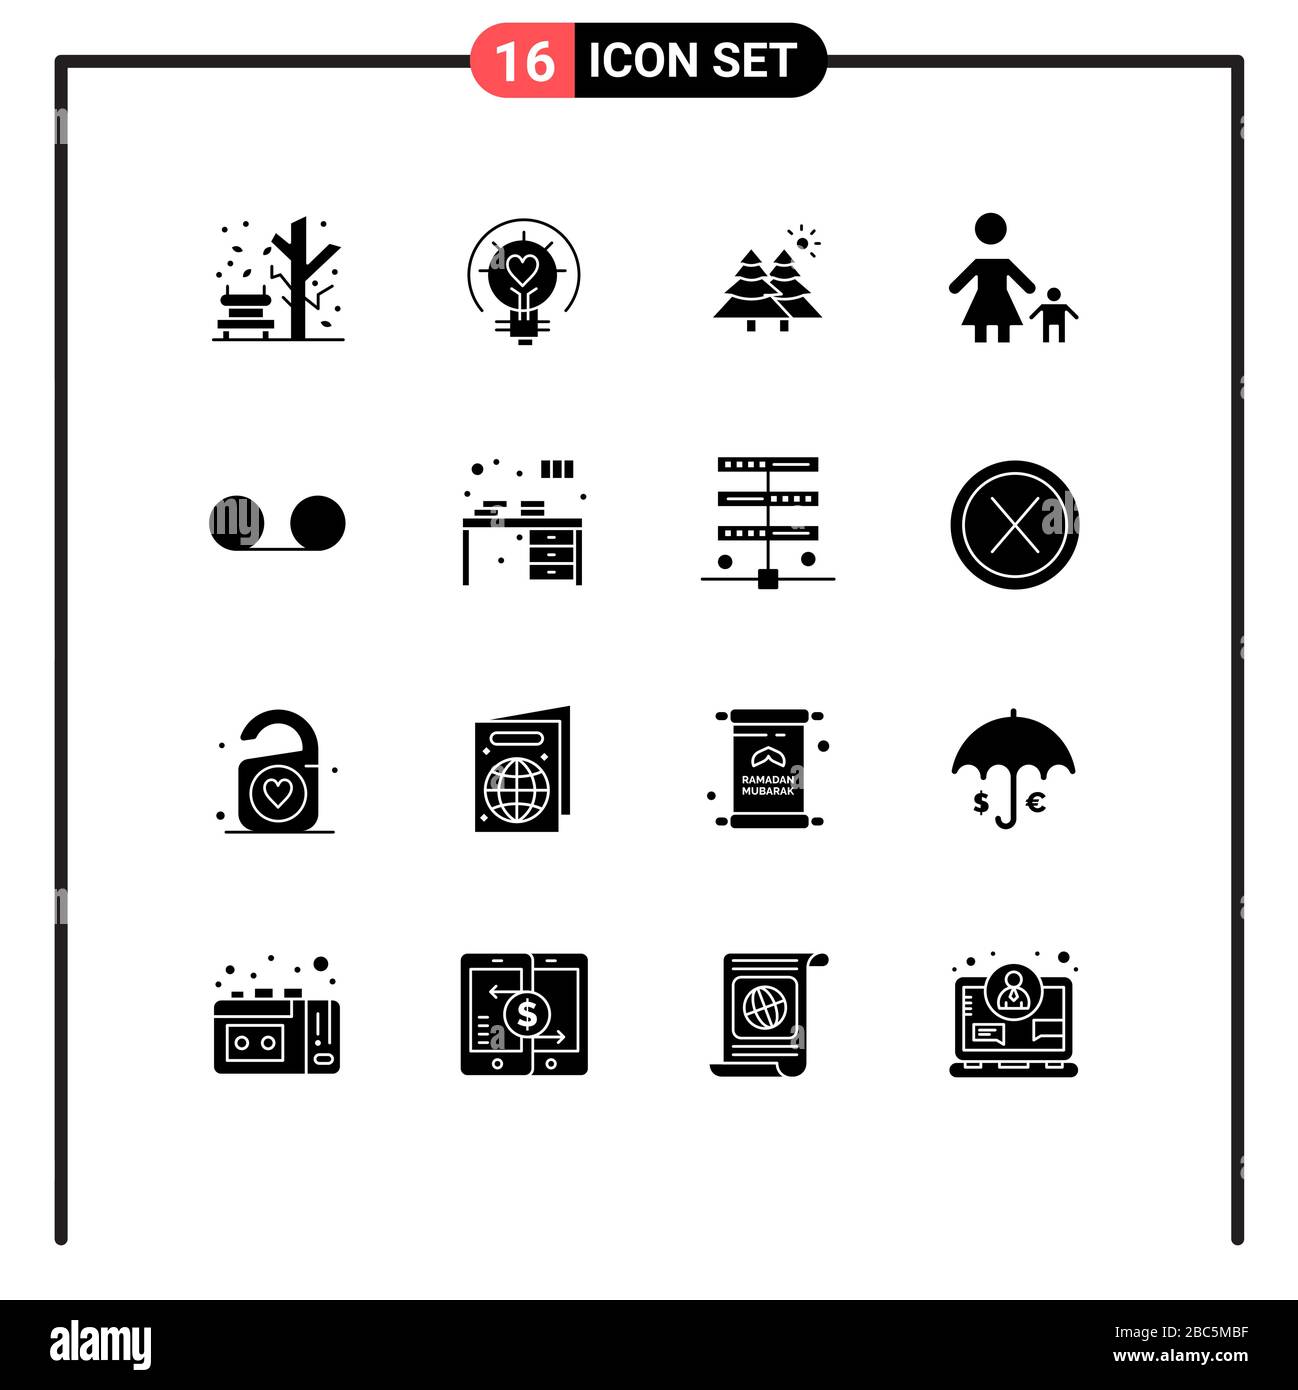 Set of 16 Modern UI Icons Symbols Signs for mother, kid, tips, family, trees Editable Vector Design Elements Stock Vector